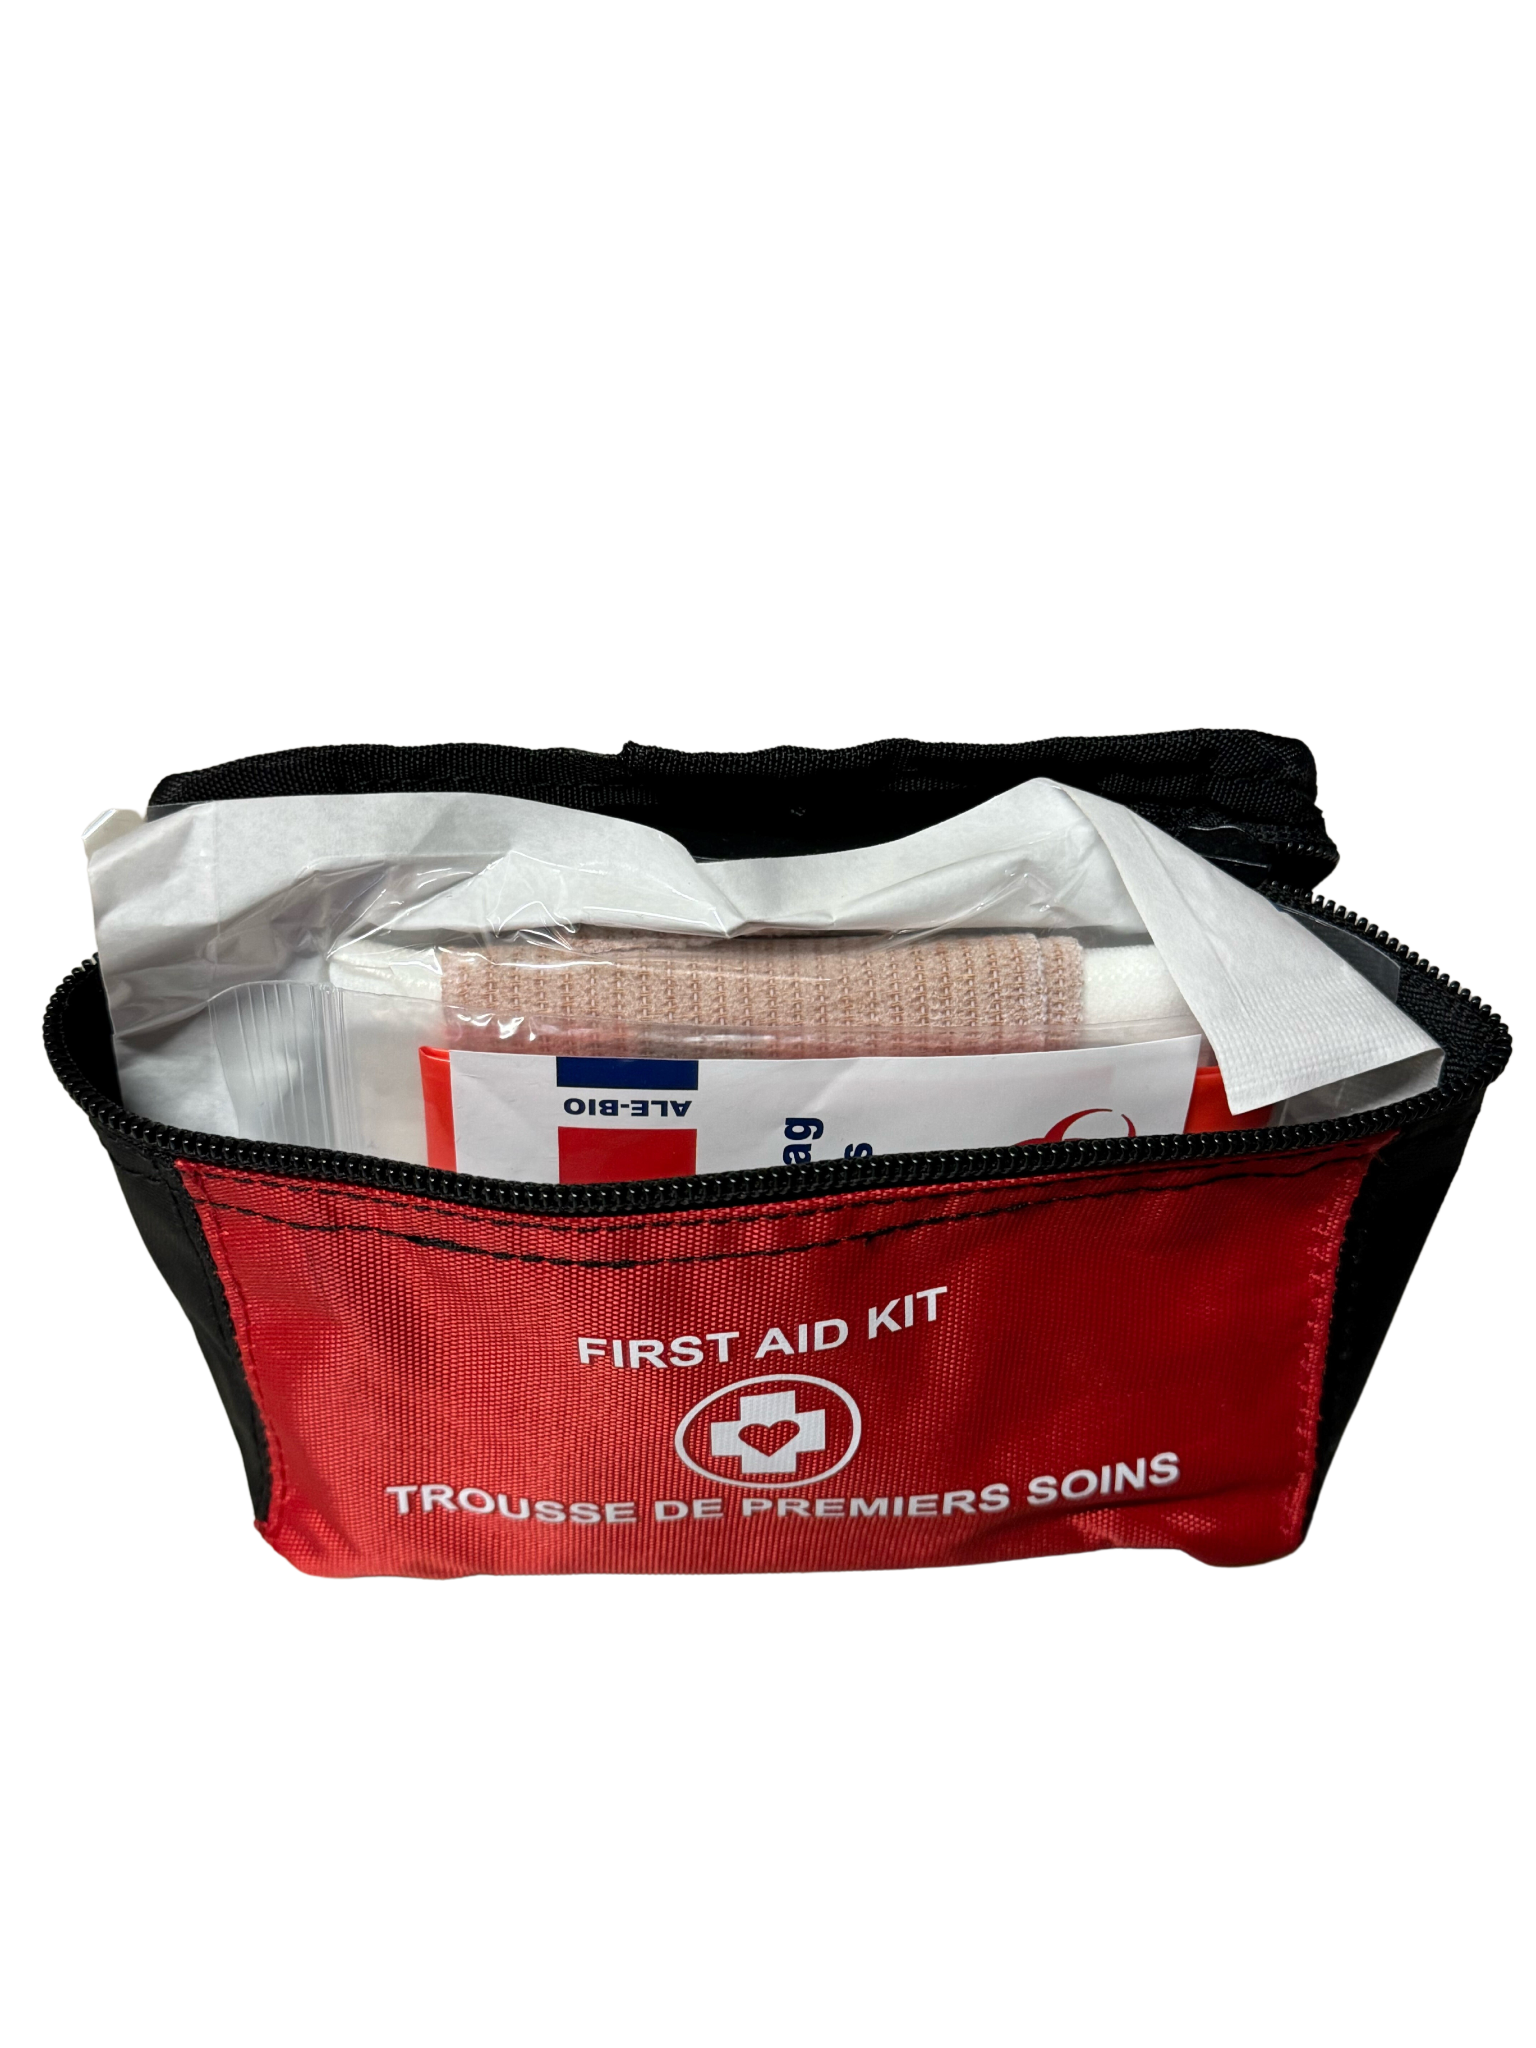 WorkSafeBC Personal First Aid Kit image